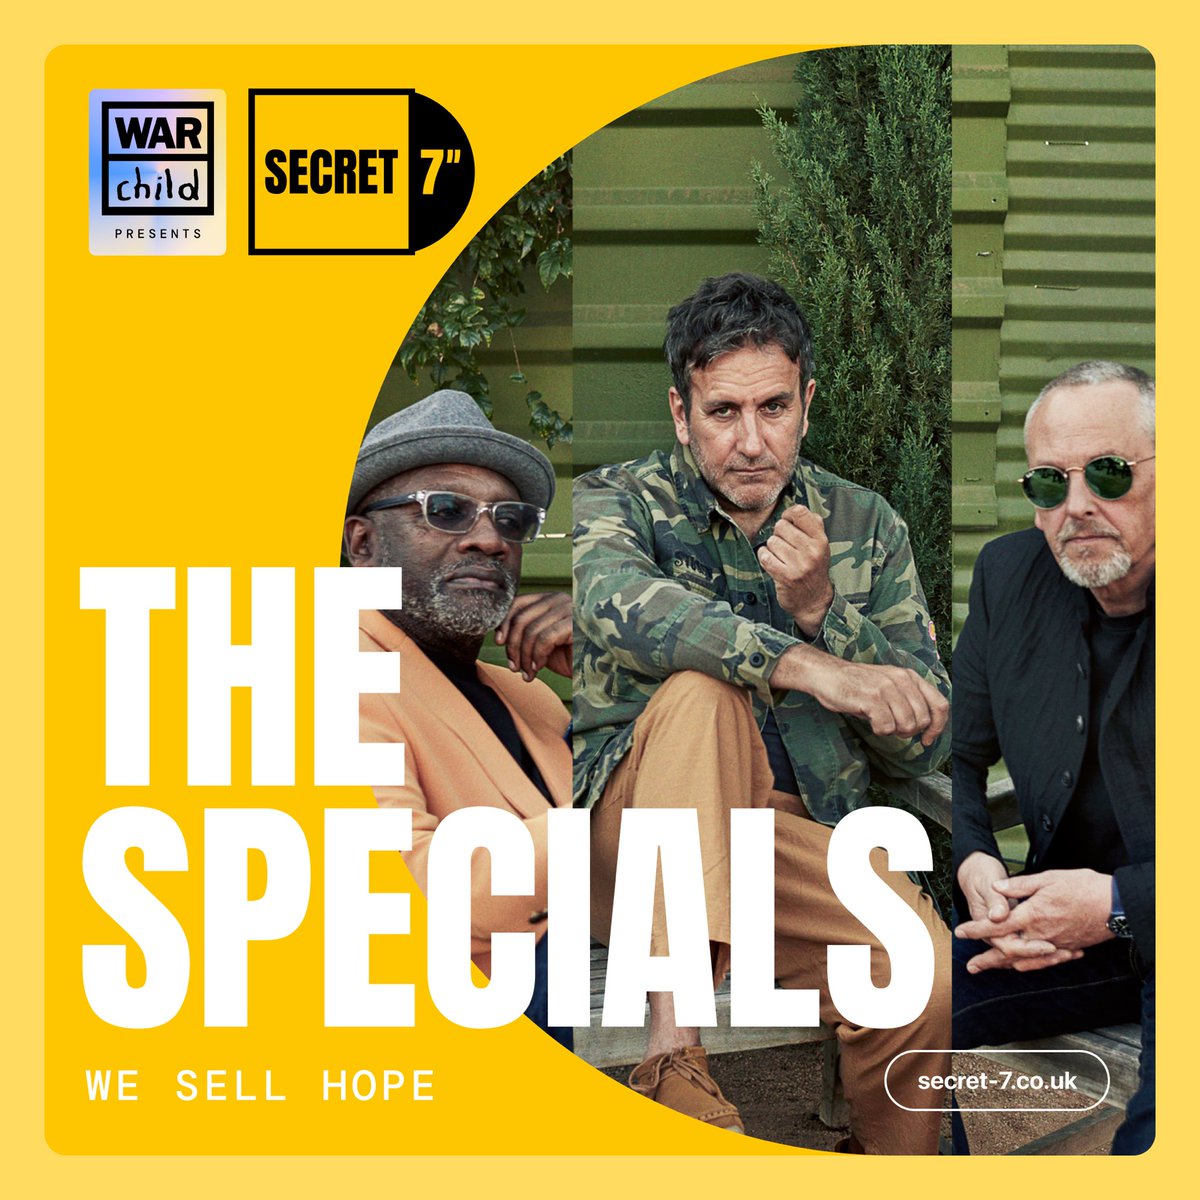 War Child is bringing back @Secret7s and you can design the artwork for a unique vinyl release of We Sell Hope!   Find out more and submit your artwork: bit.ly/3S6Bf76 and help @warchilduk support children and families affected by conflict. #Secret7 #WarChild